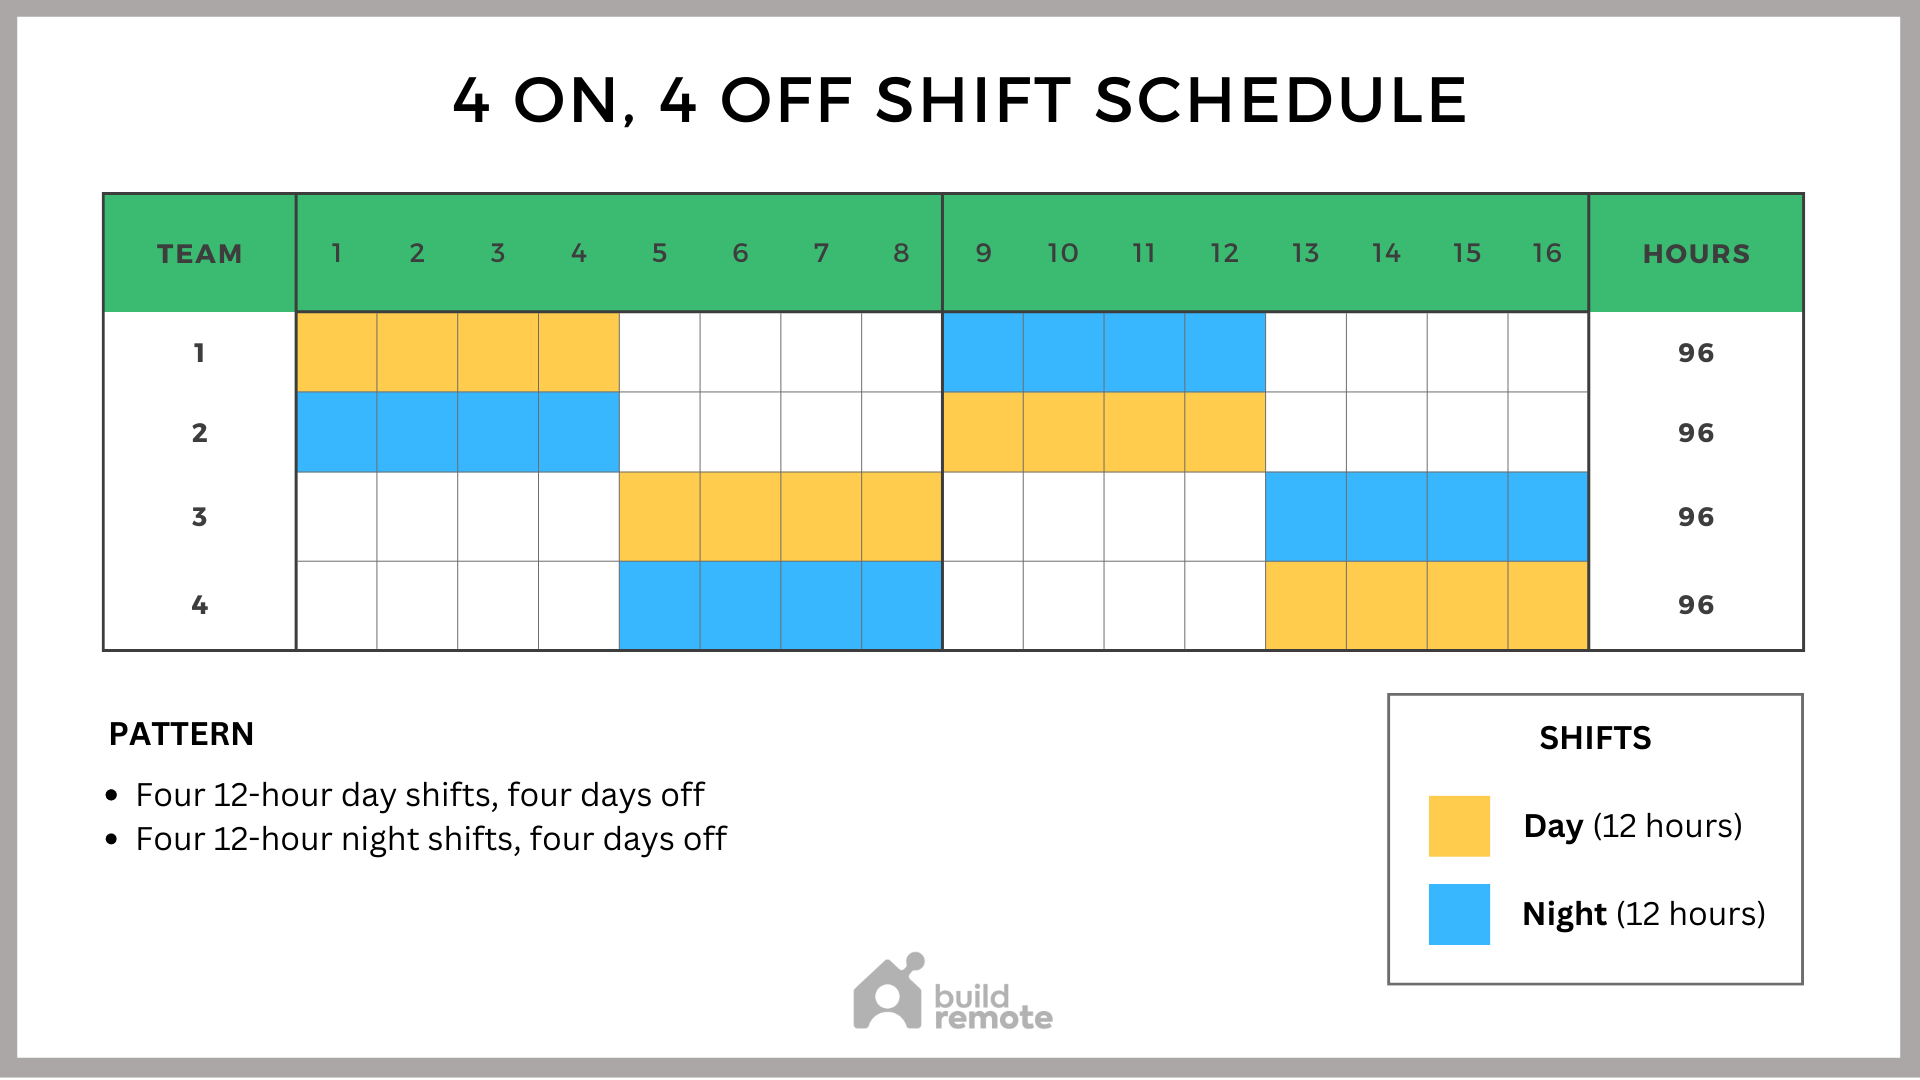 4 On, 4 Off Schedule Template (12-Hour Shifts)  Buildremote